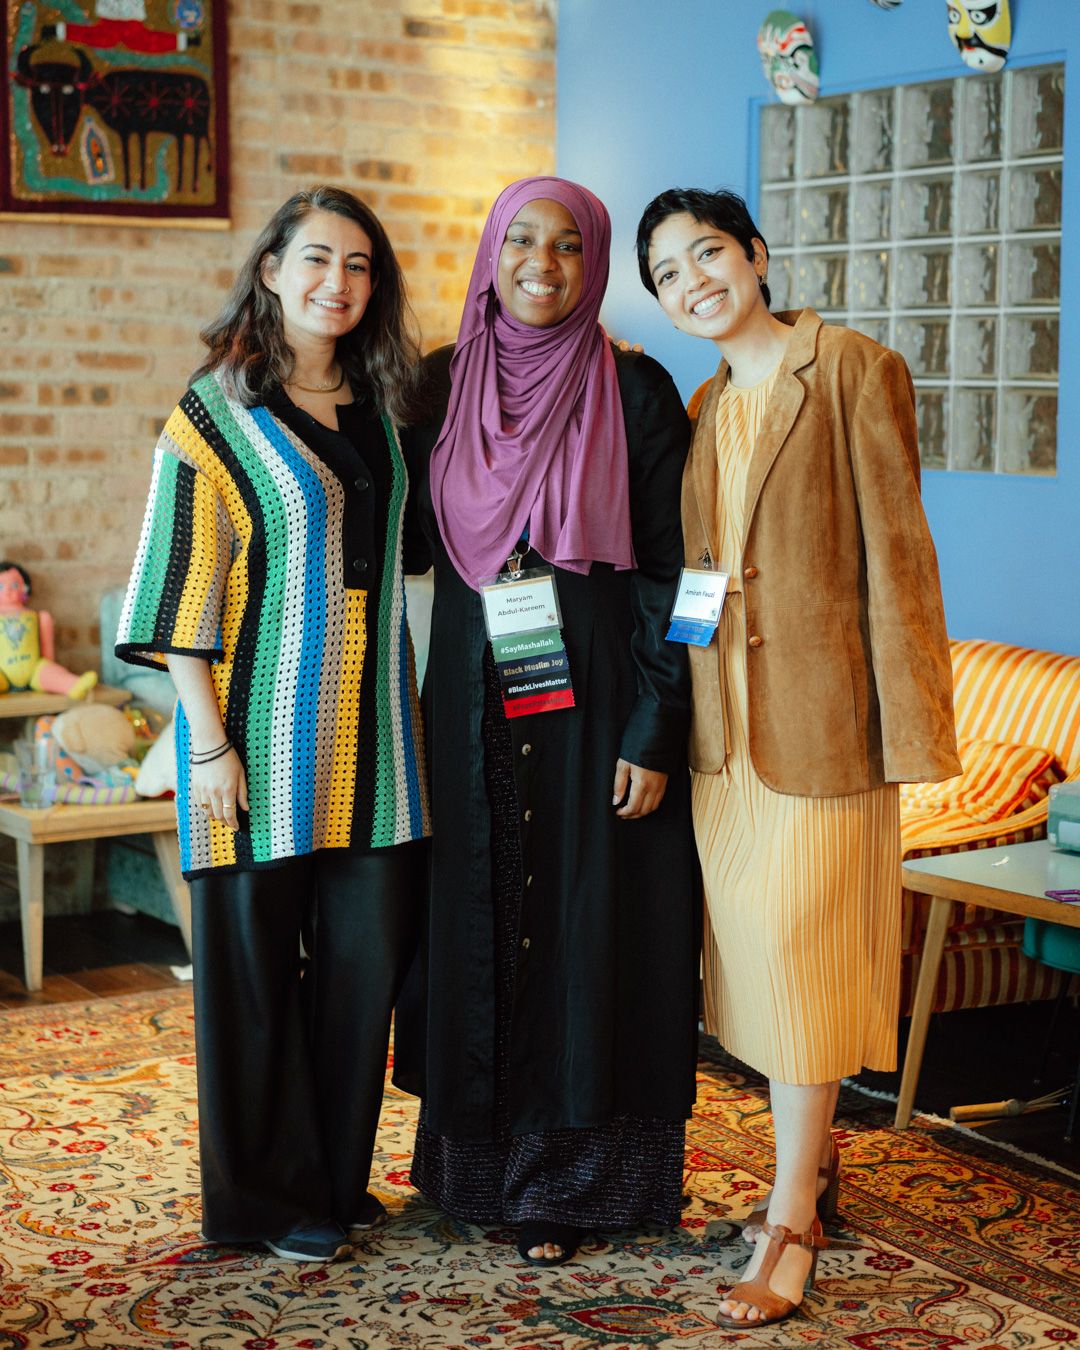 A photo of the Pillars Catalyze Fund team smiling with their arms around each other, featuring Program Associate Mawish Raza, Senior Manager Maryam Abdul-Kareem, and Program Director Amirah Fauzi